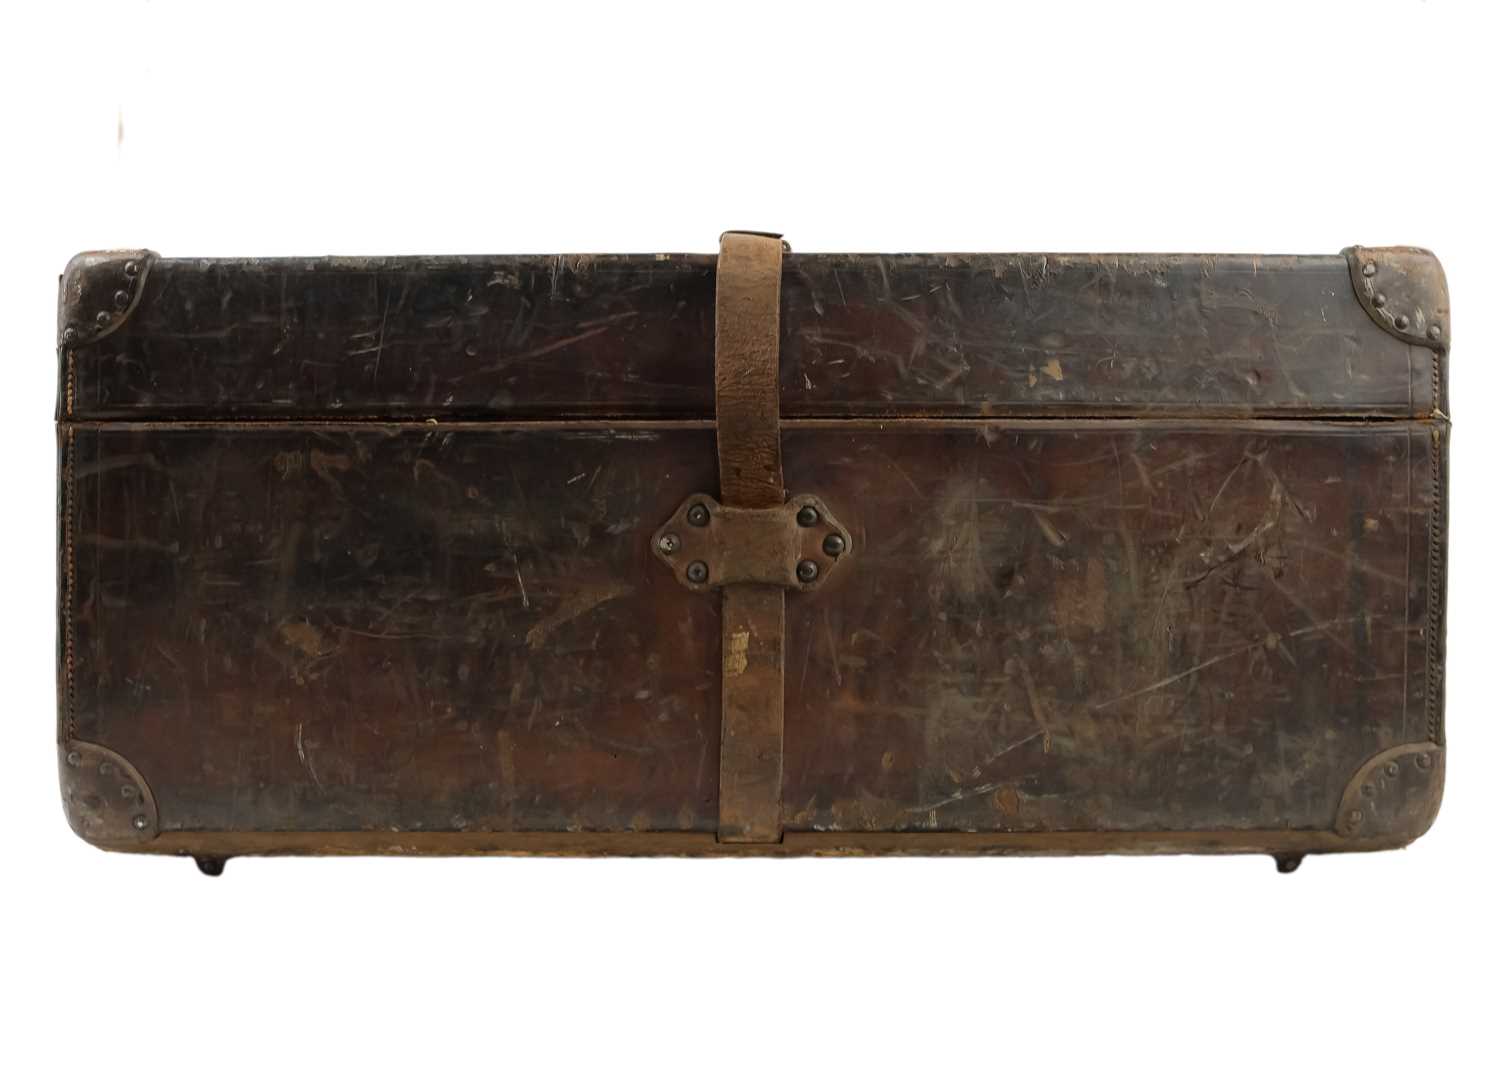 An early 20th century Louis Vuitton brown leather motoring trunk. - Image 4 of 6